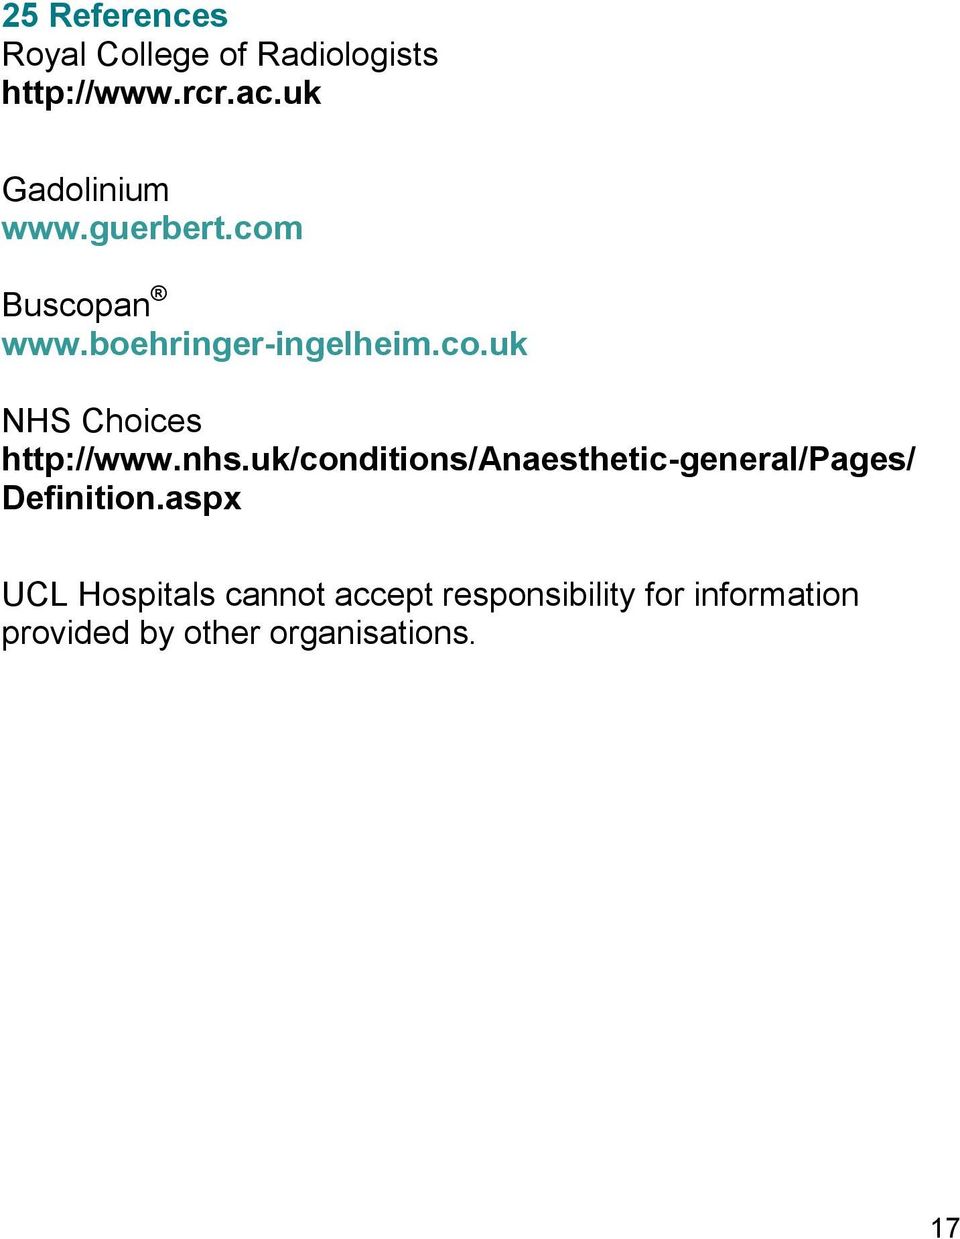 nhs.uk/conditions/anaesthetic-general/pages/ Definition.